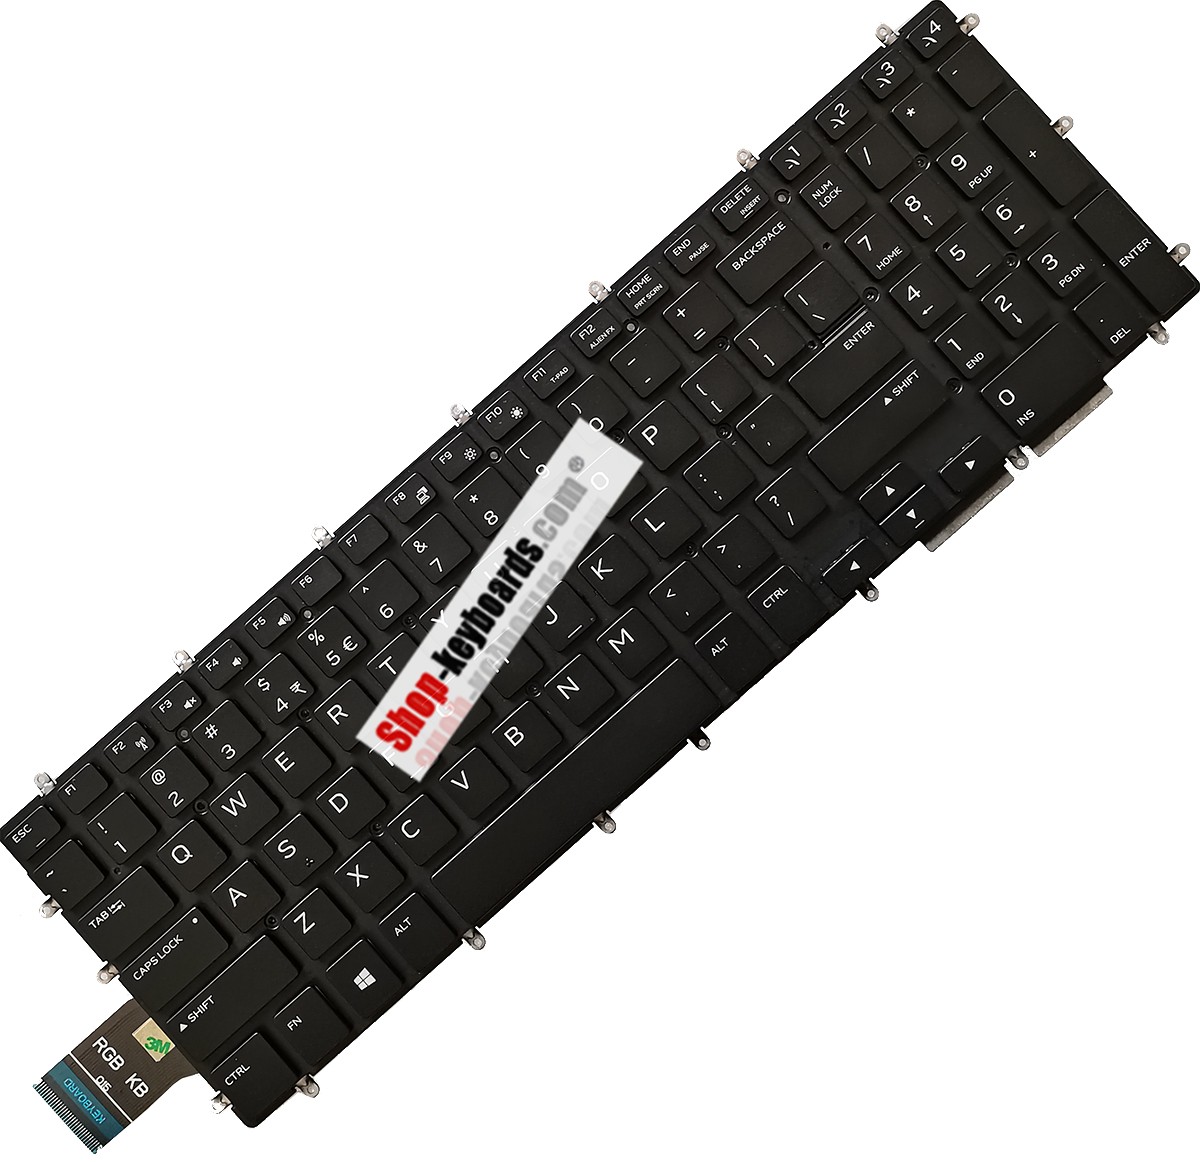 Dell M15-8387 Keyboard replacement